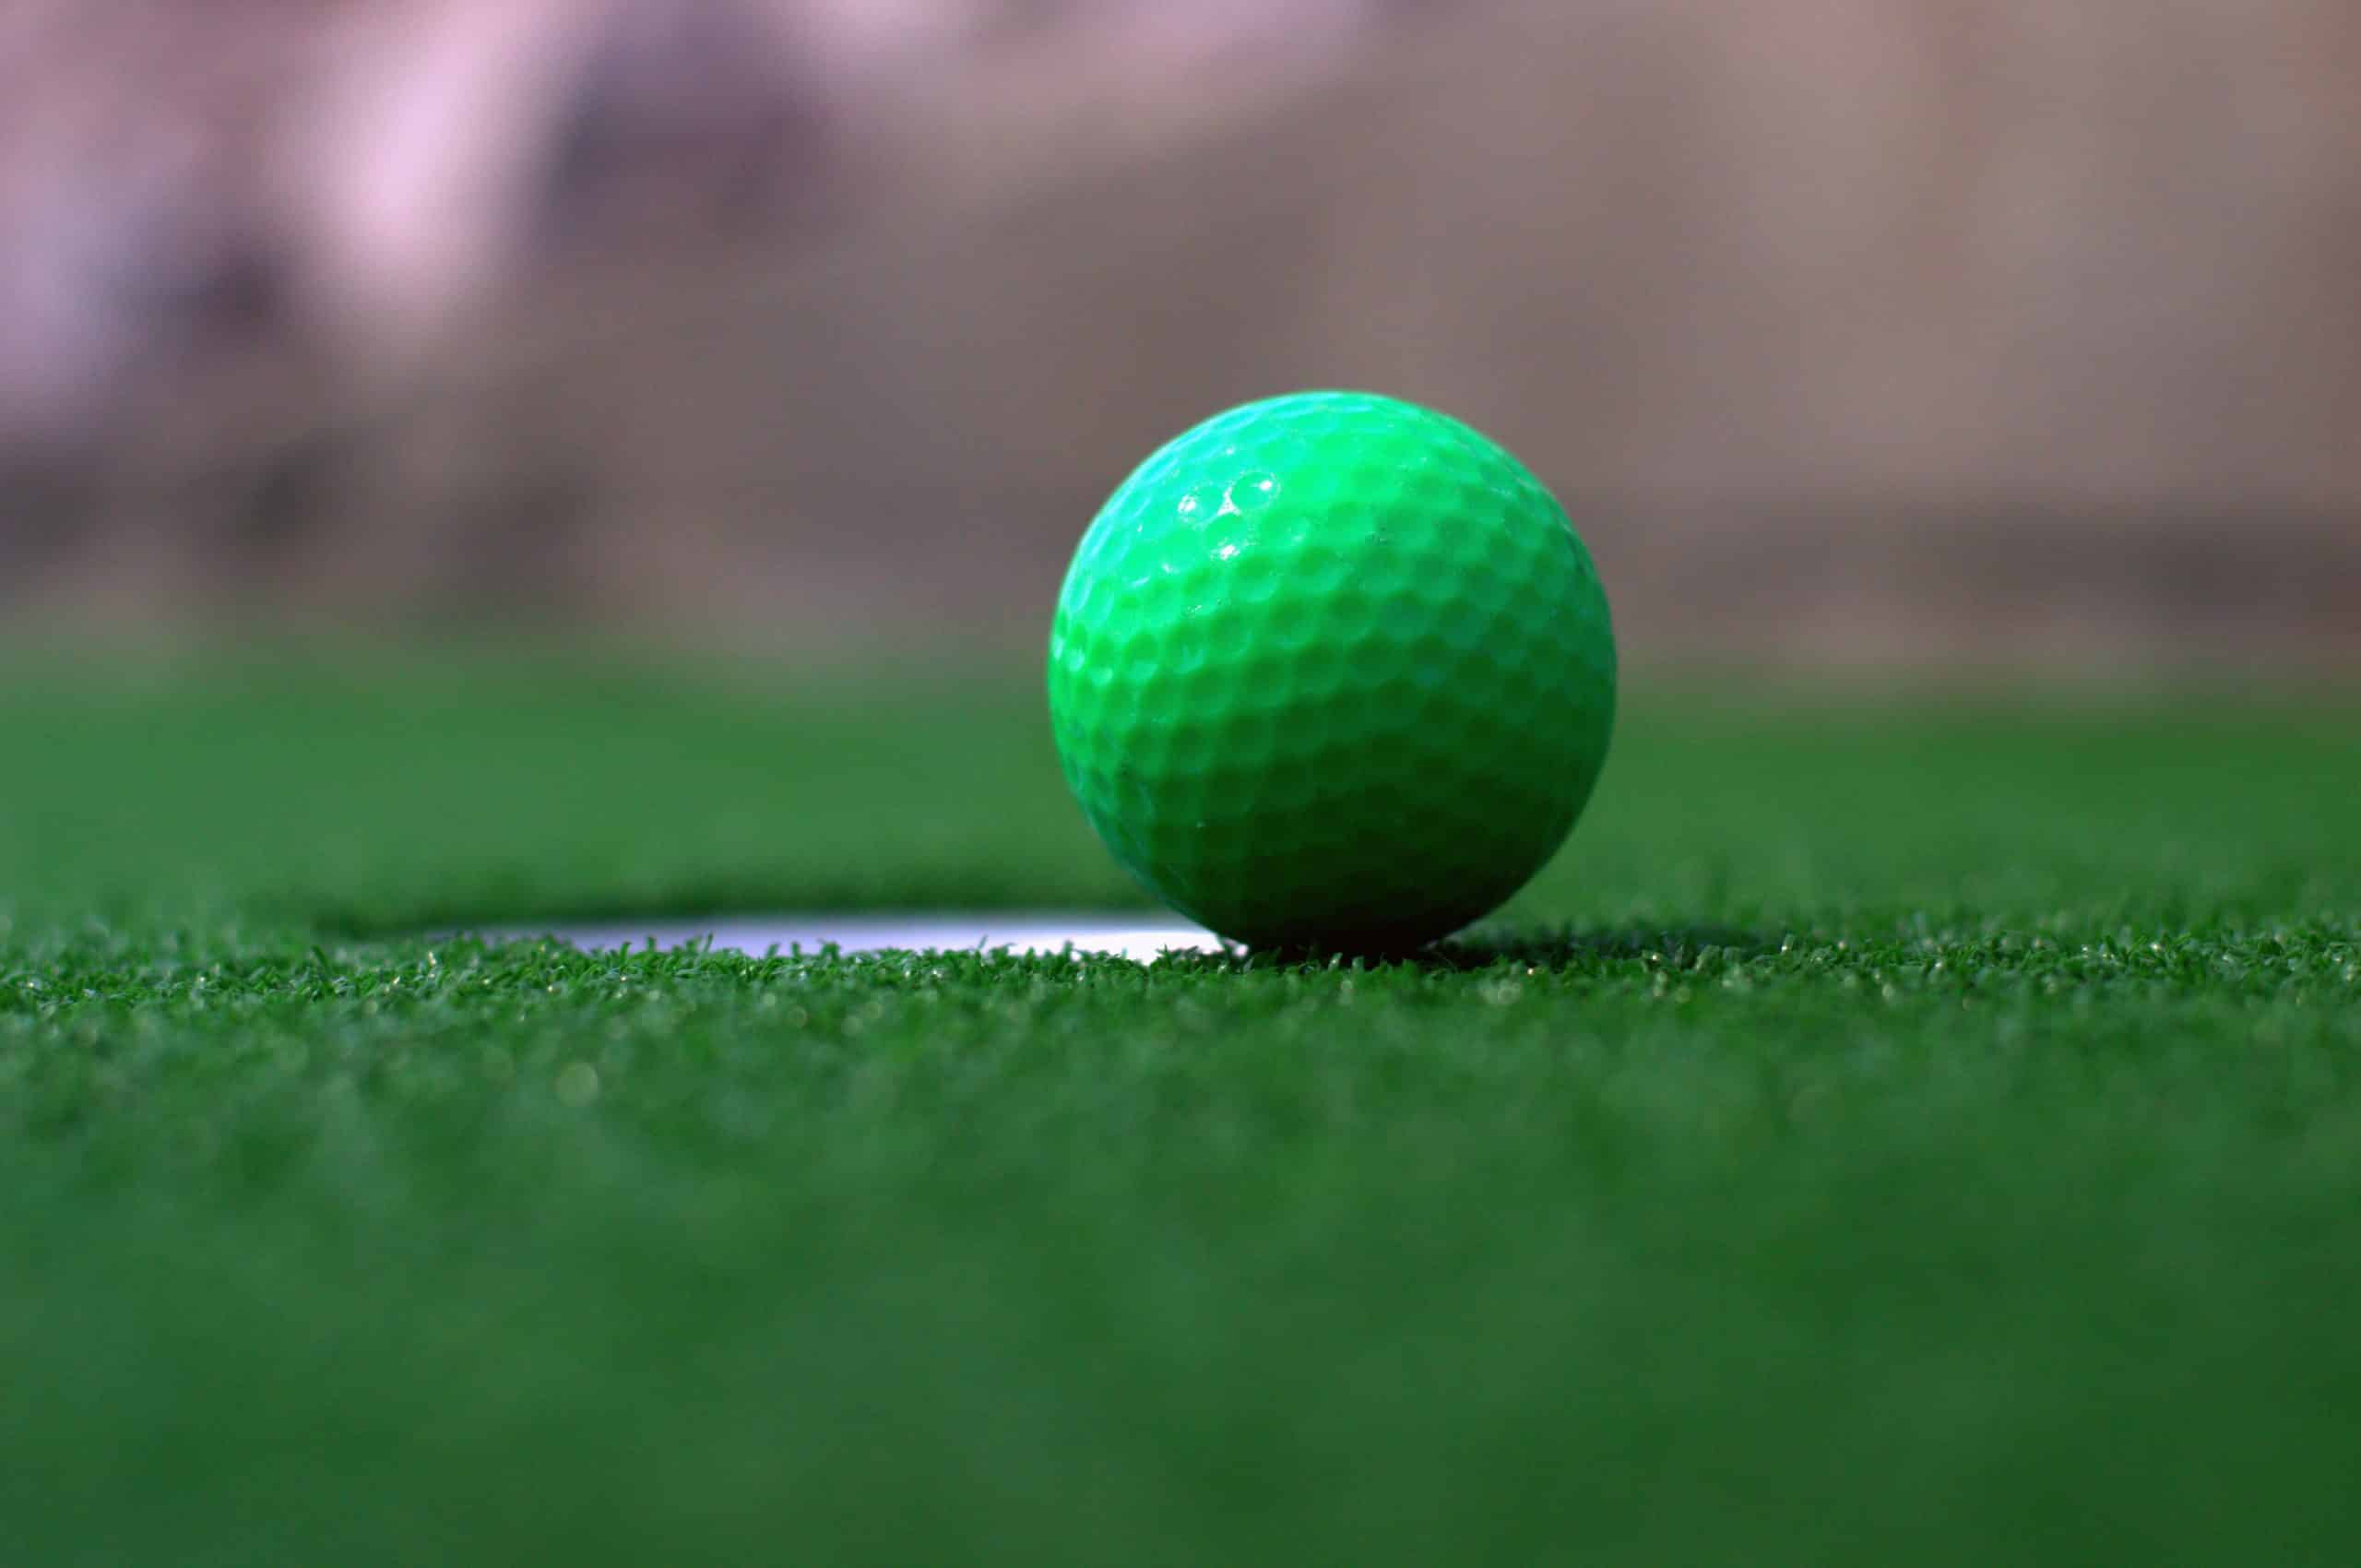 Puttshack gets $150M from BlackRock to Fuel Mini Golf Entertainment Growth 1